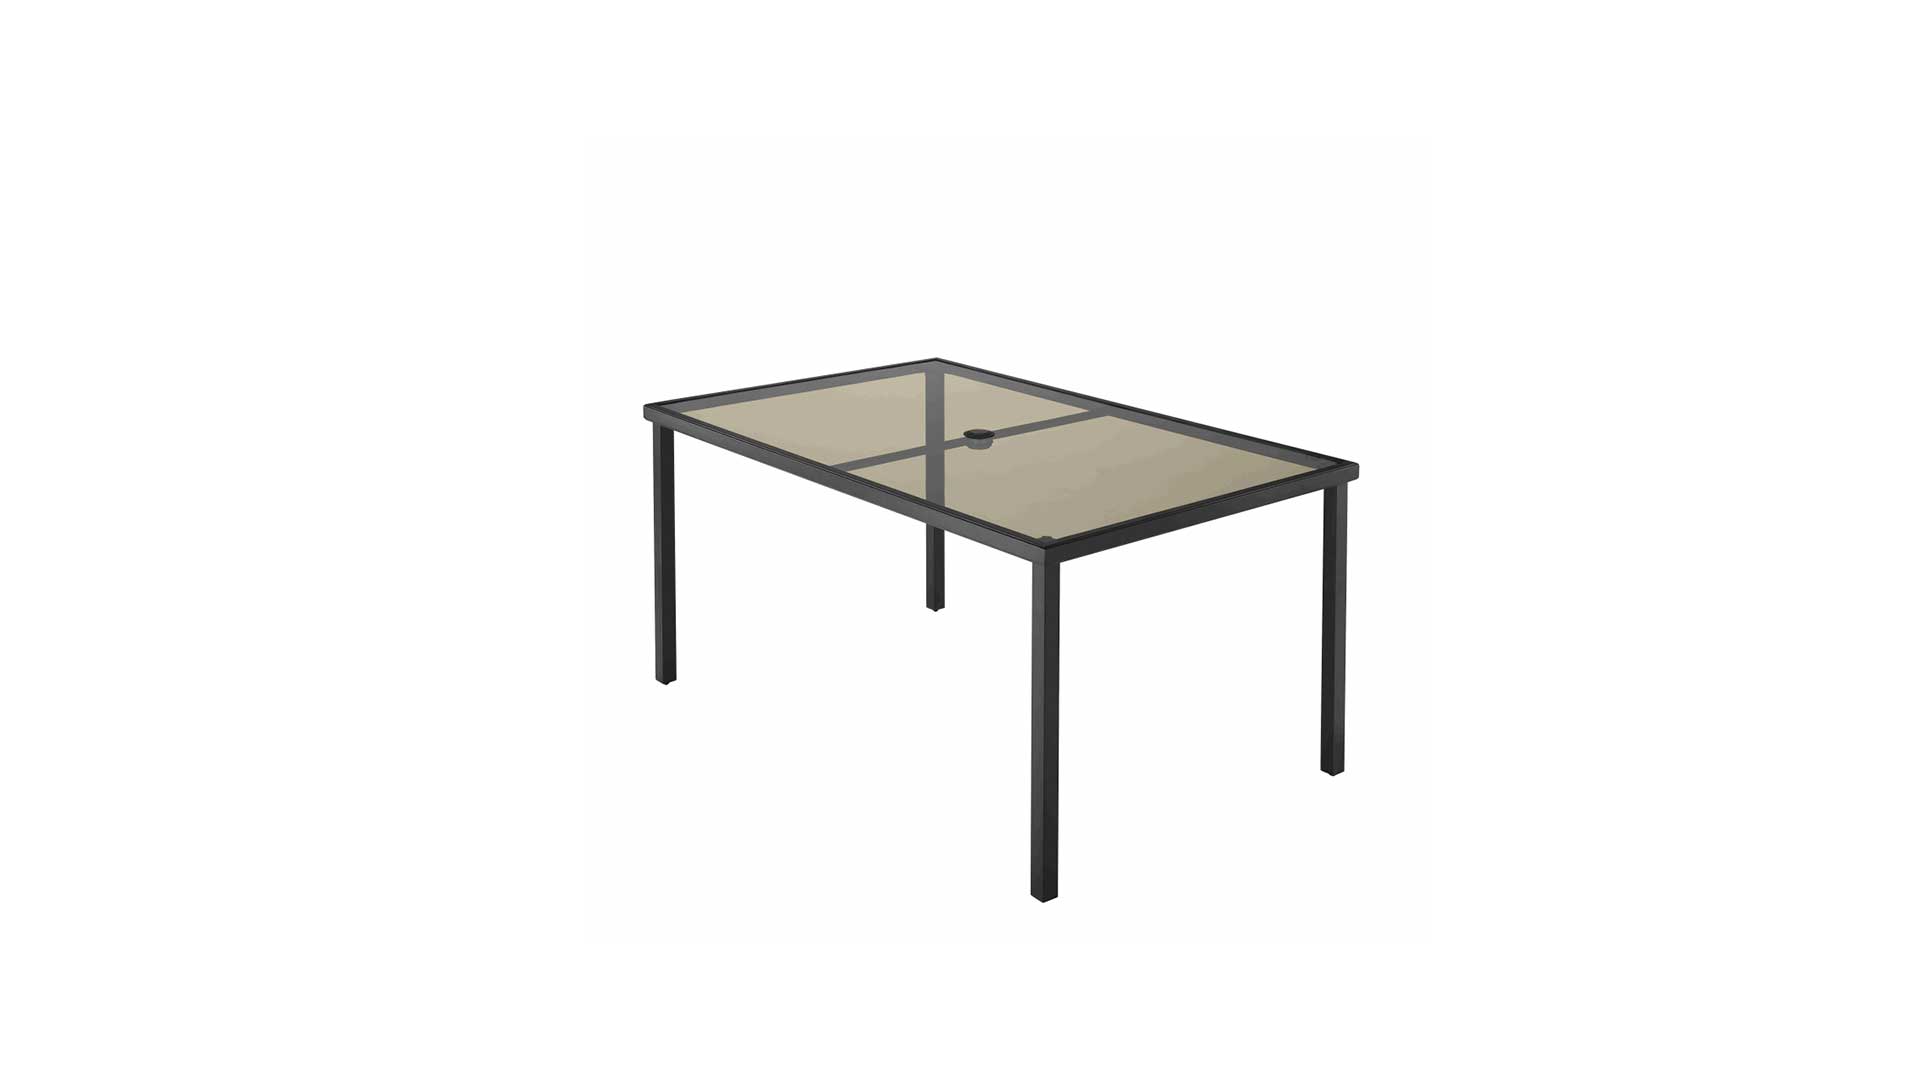 Steel Rectangular Outdoor Patio Dining Table with Glass Top